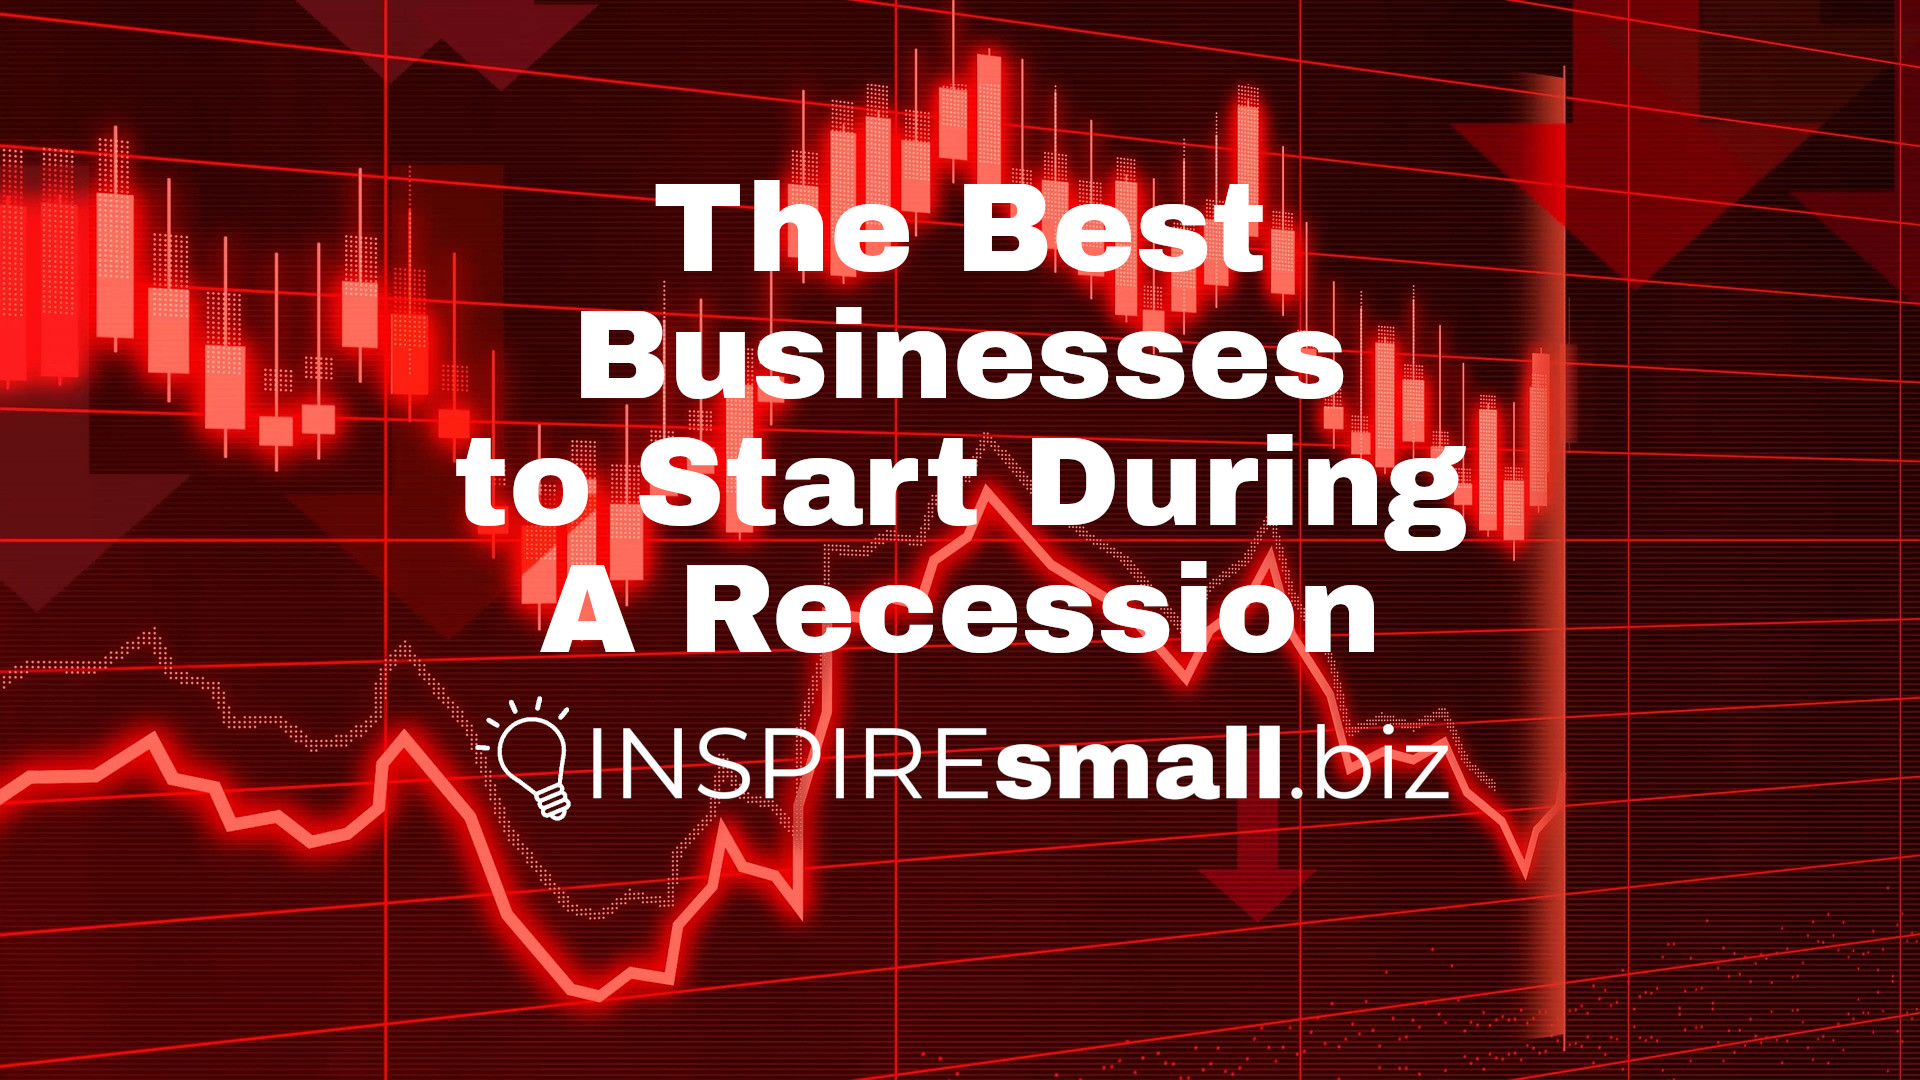 The Best Businesses to Start During a Recession: Opportunities Amid Economic Challenges